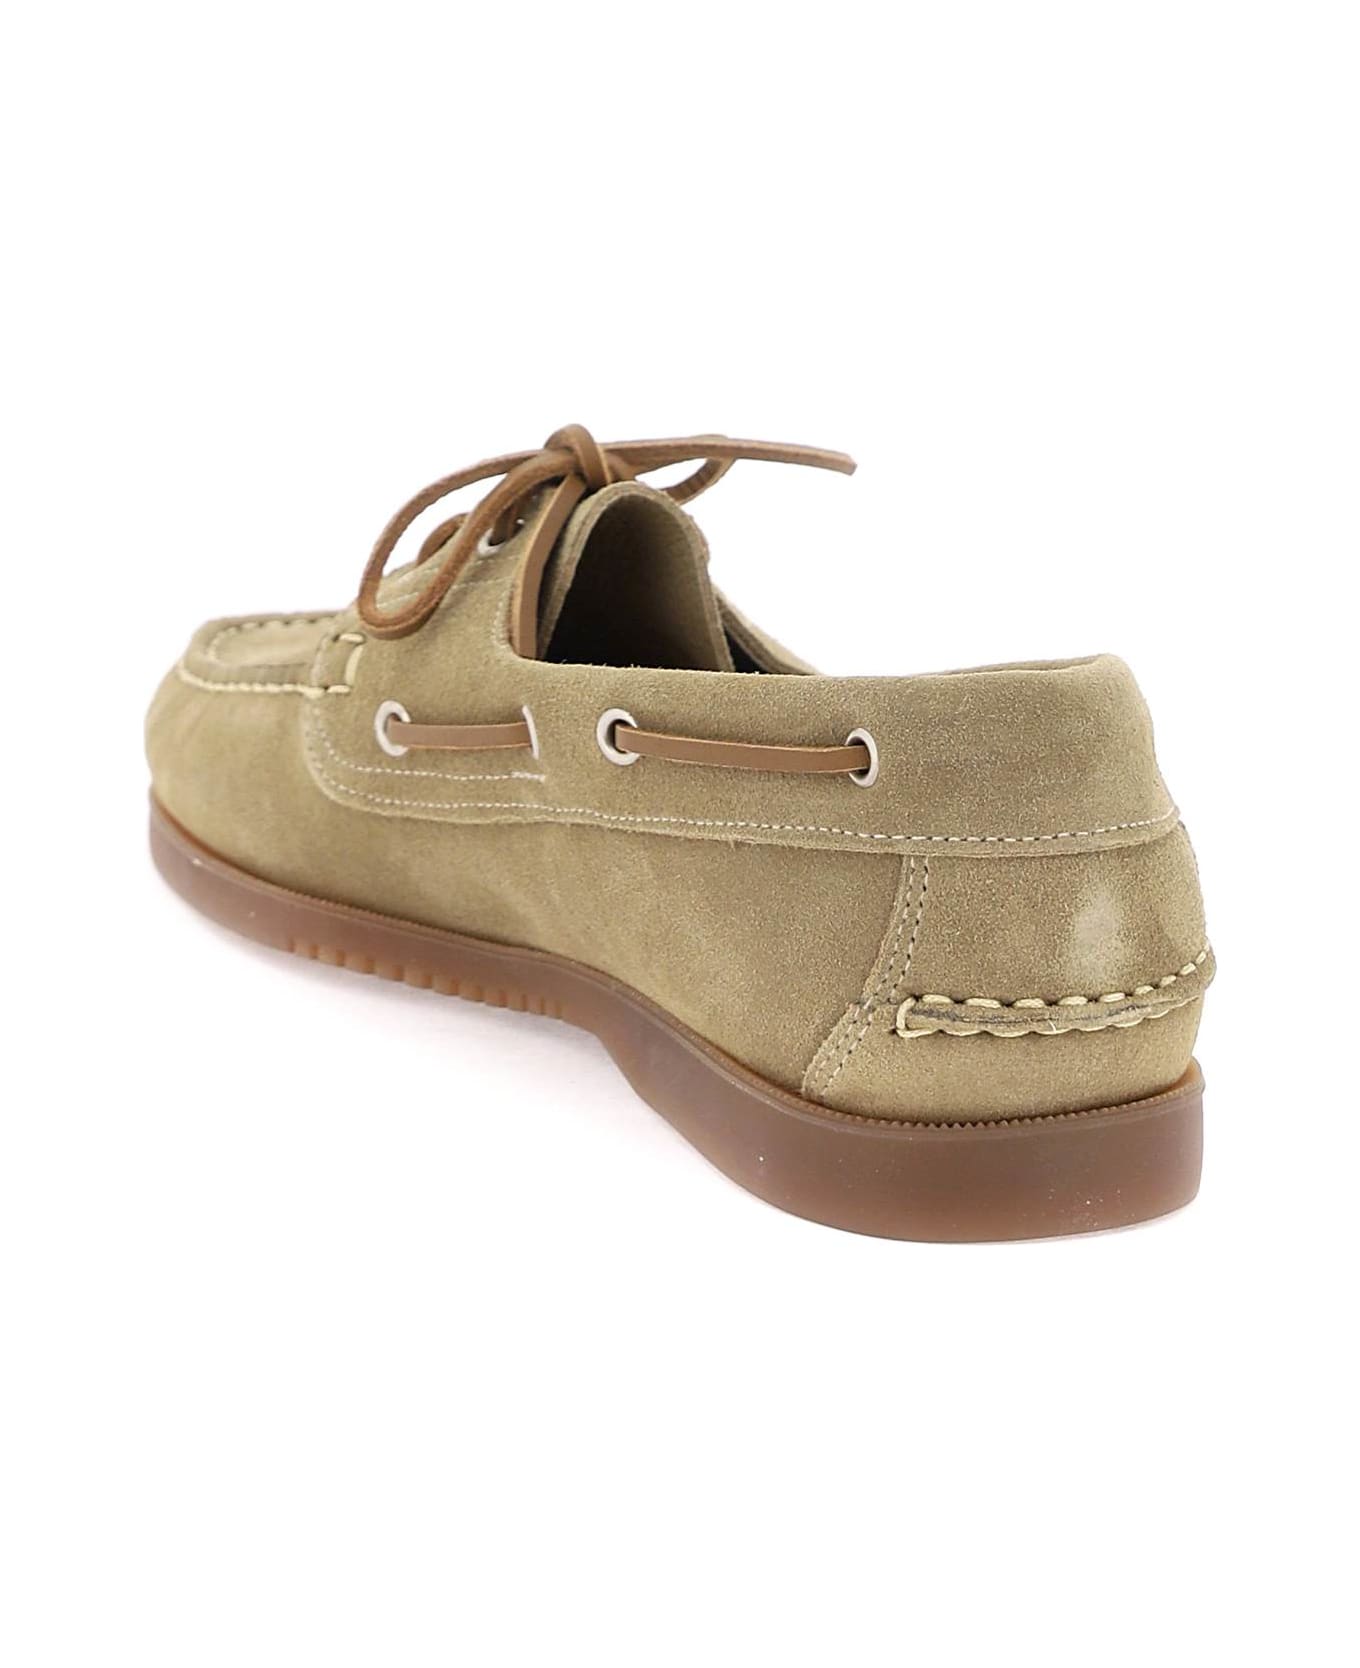 Paraboot Barth Loafers - MIEL VEL SAND (Beige)